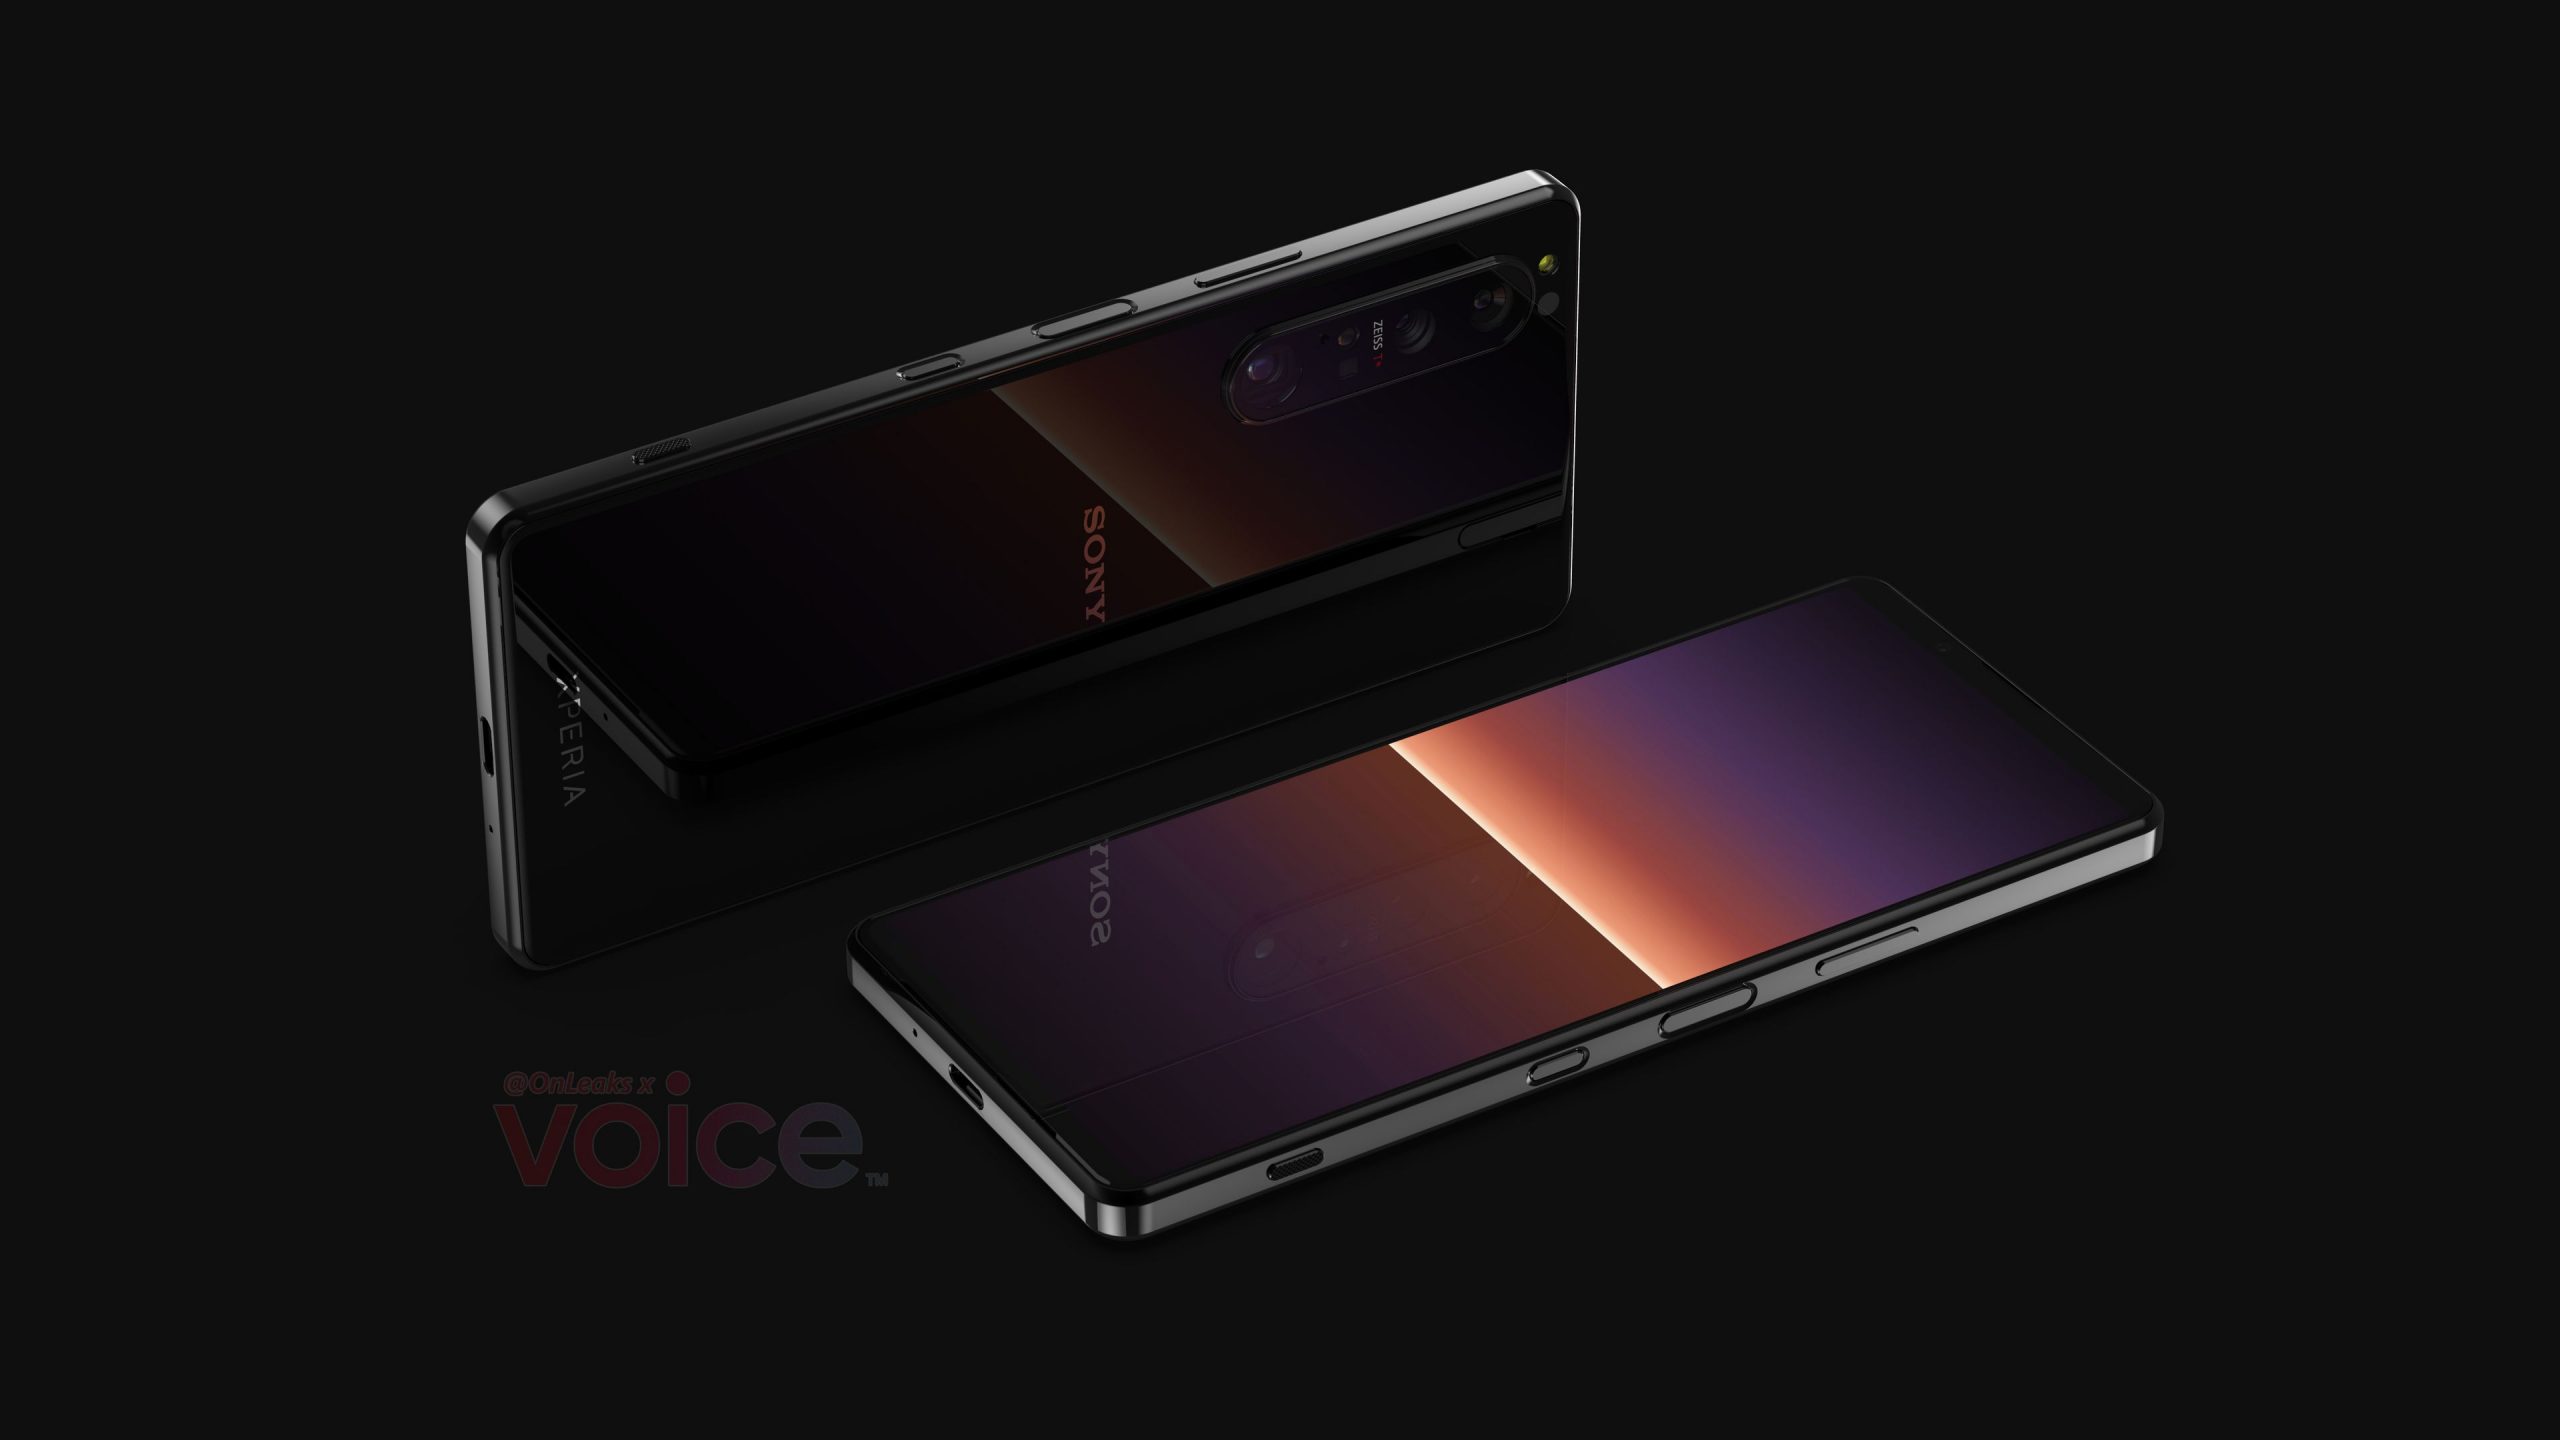 First look at Sony Xperia 1 III shows an unchanged design and a new periscope lens